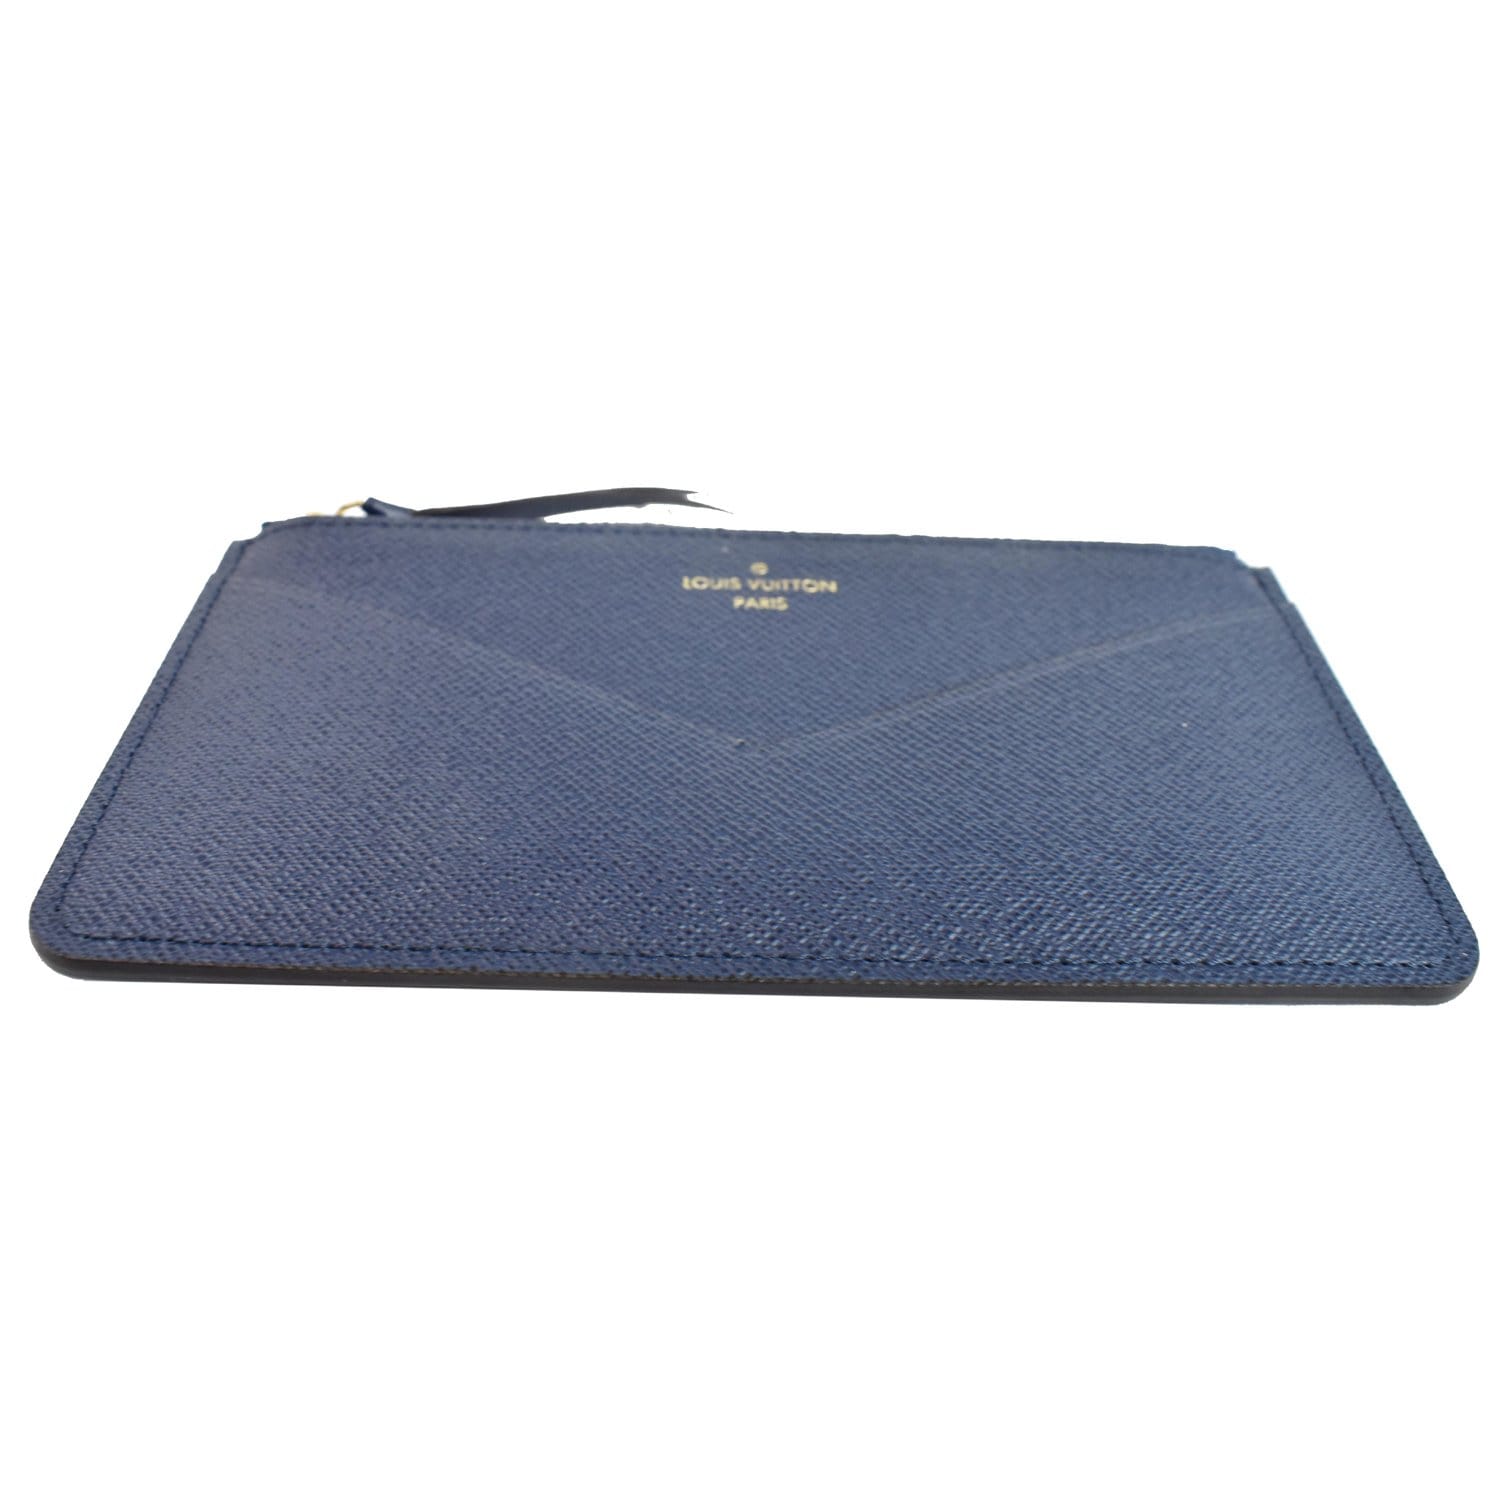 Wallet Louis Vuitton Blue in Other - 34559186